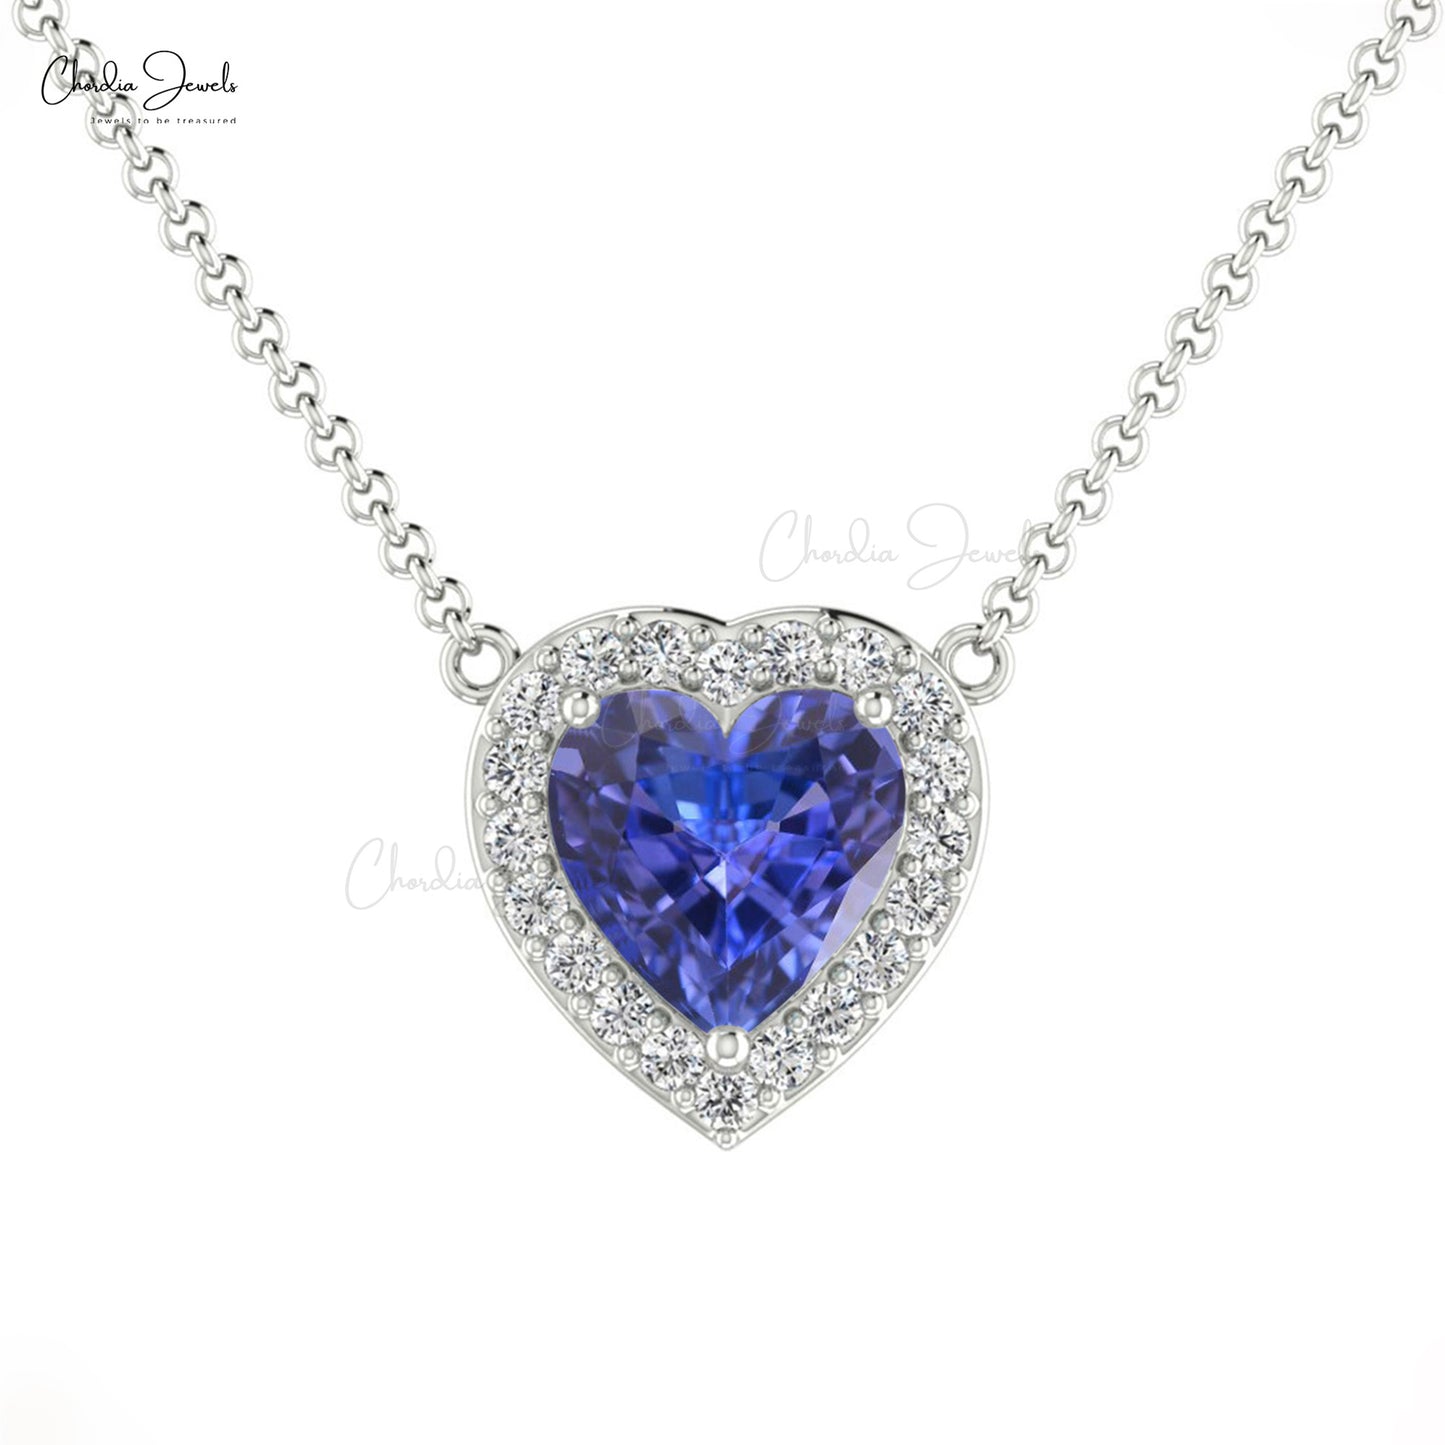 Load image into Gallery viewer, Heart Shape Gemstone Halo Necklace With Diamonds
